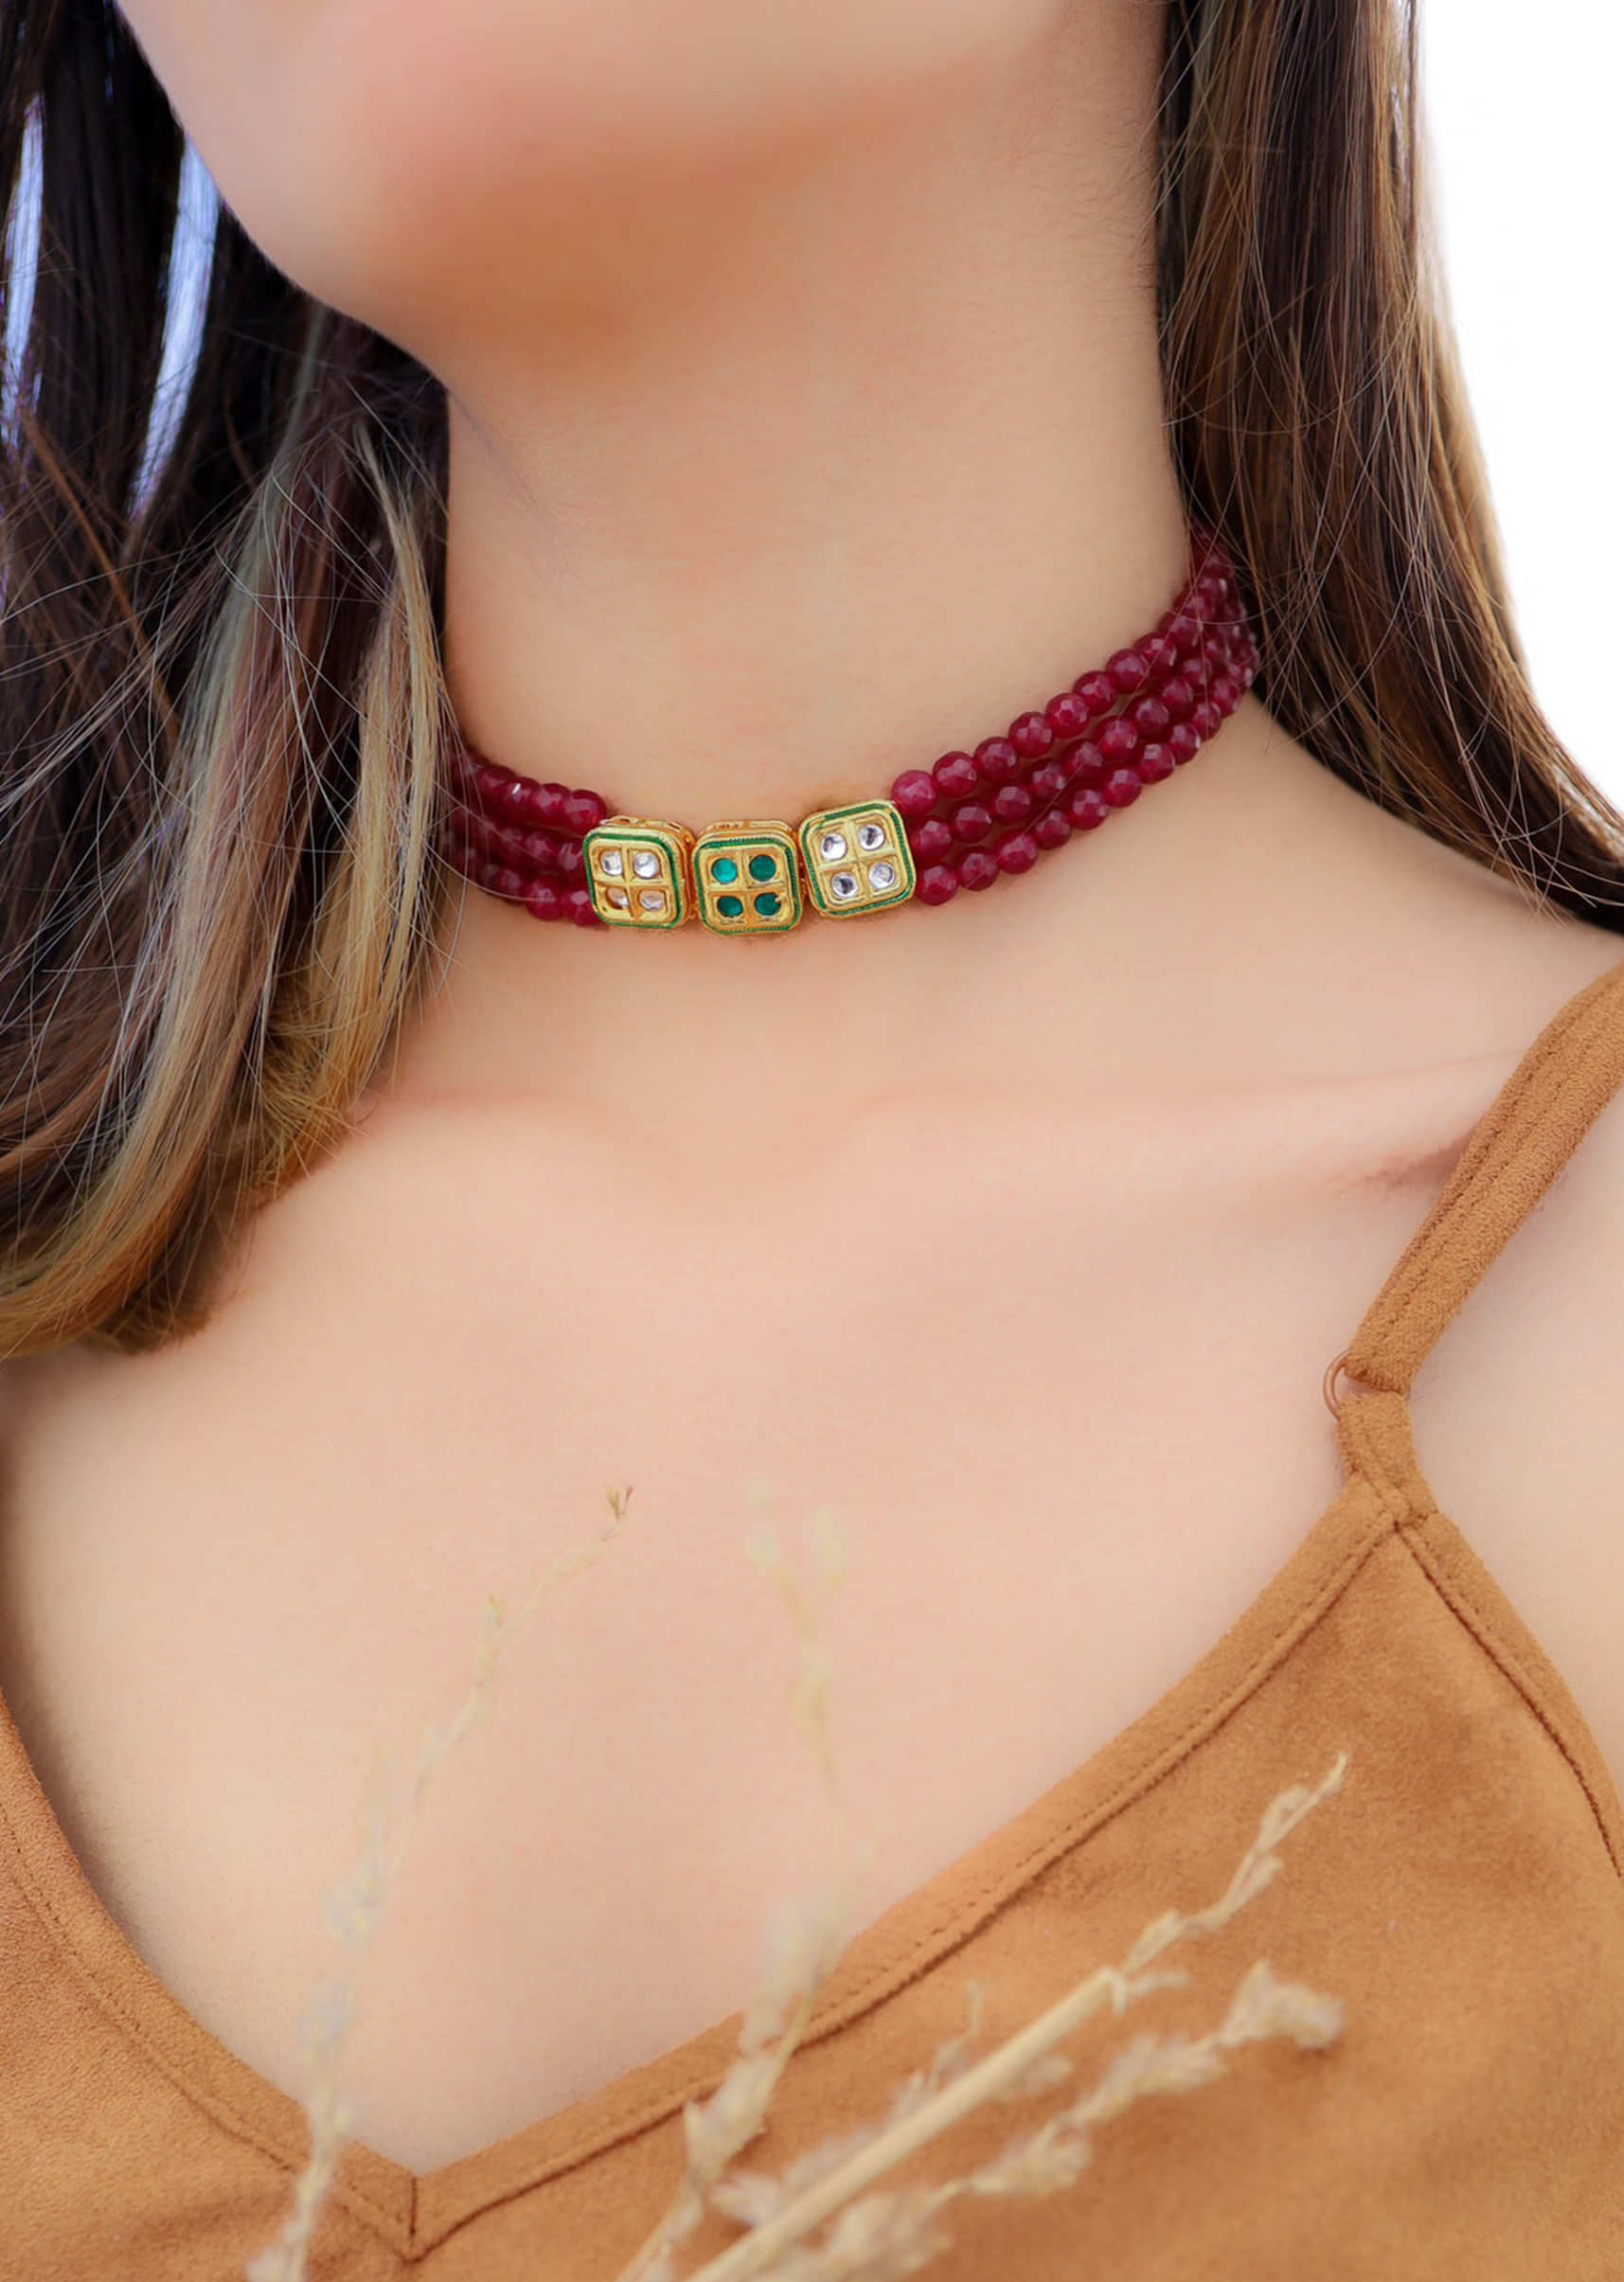 Red Pearl And Kundan Choker Necklace